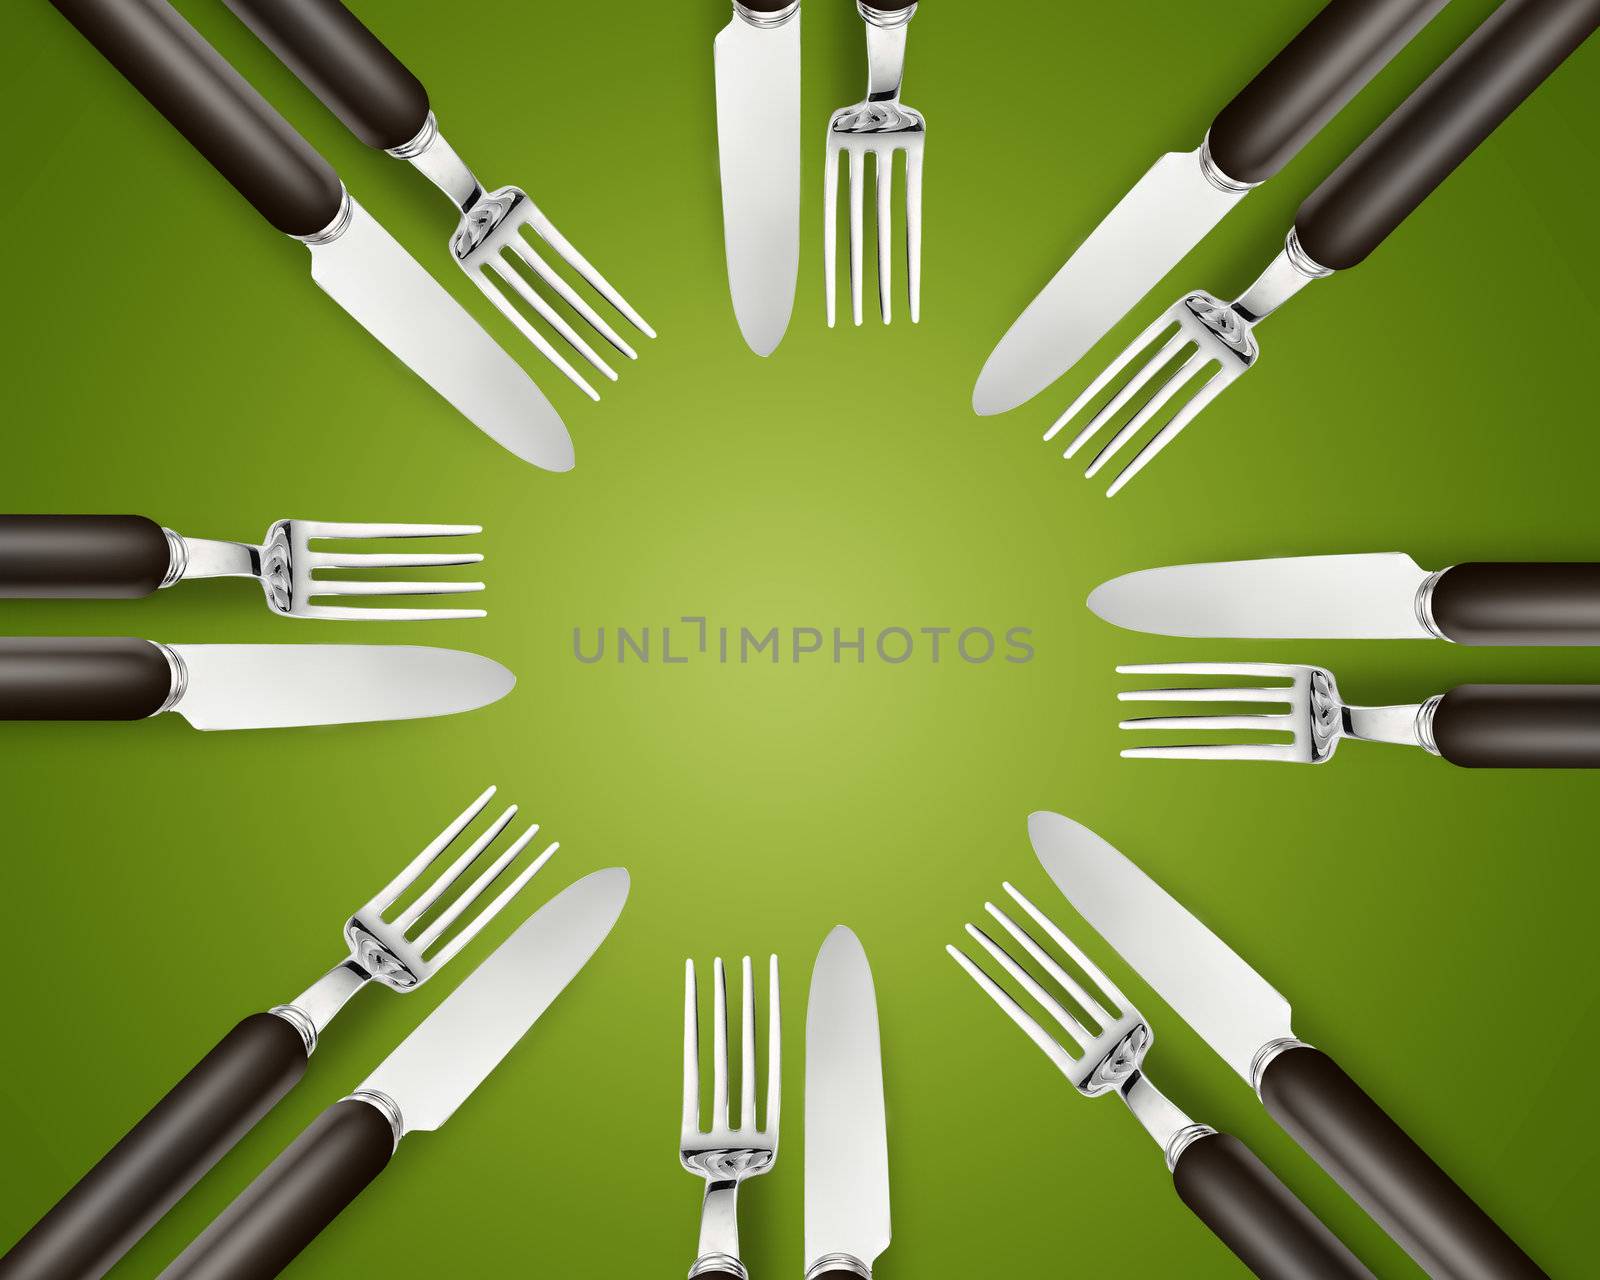 Empty copy space circle in set of knives and forks on green background.